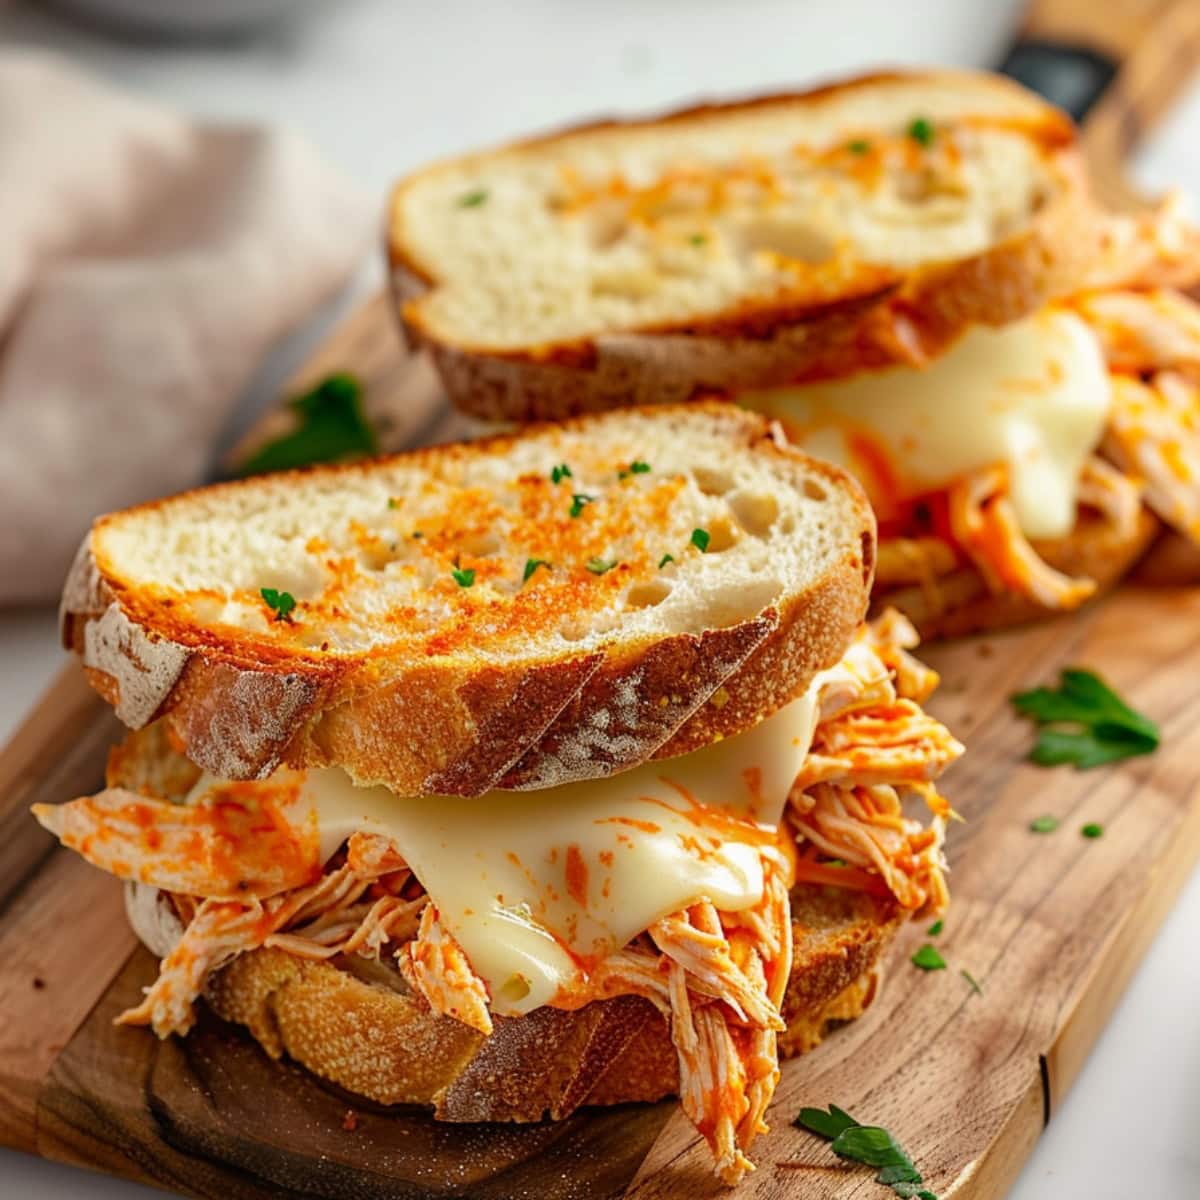 Pair of sandwiches with shredded chicken and cheese filling on a wooden cutting board.